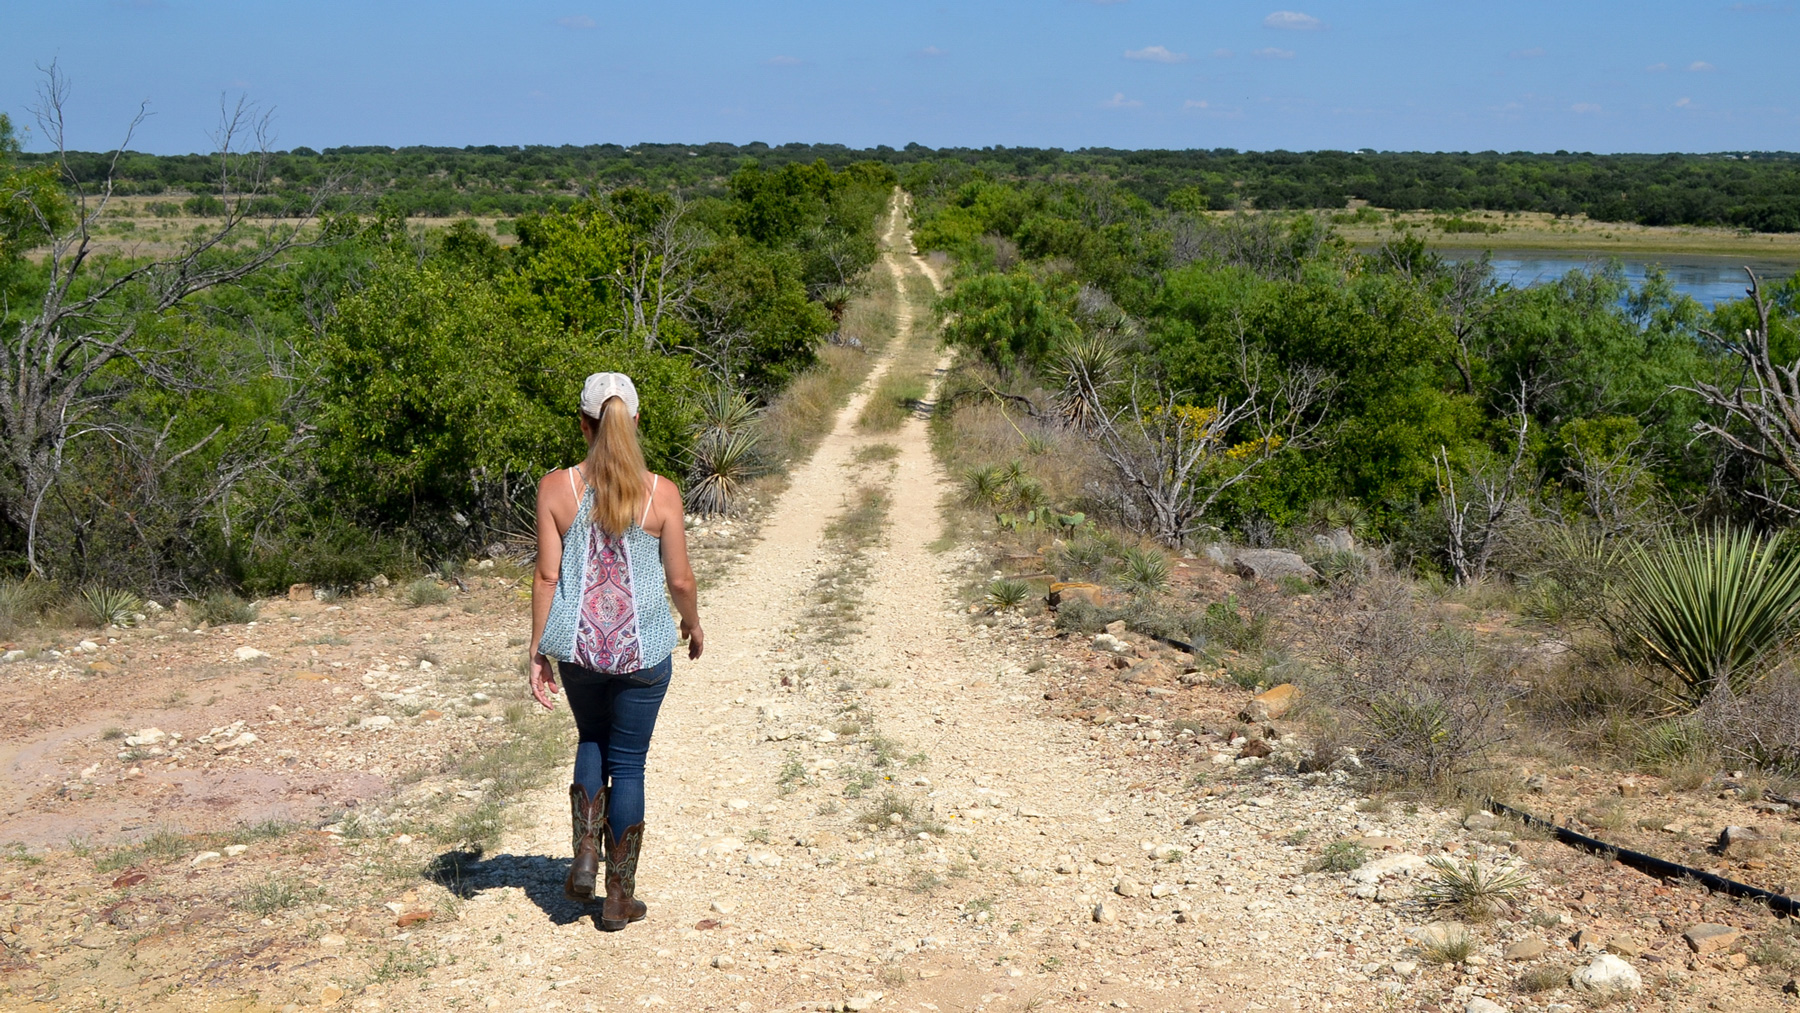 Beef farmer Amy Greer walks along the property line of her ranch in Brady, Texas. Her family is working with city officials to prepare easements for a new water system. (Elizabeth Sims/News21)